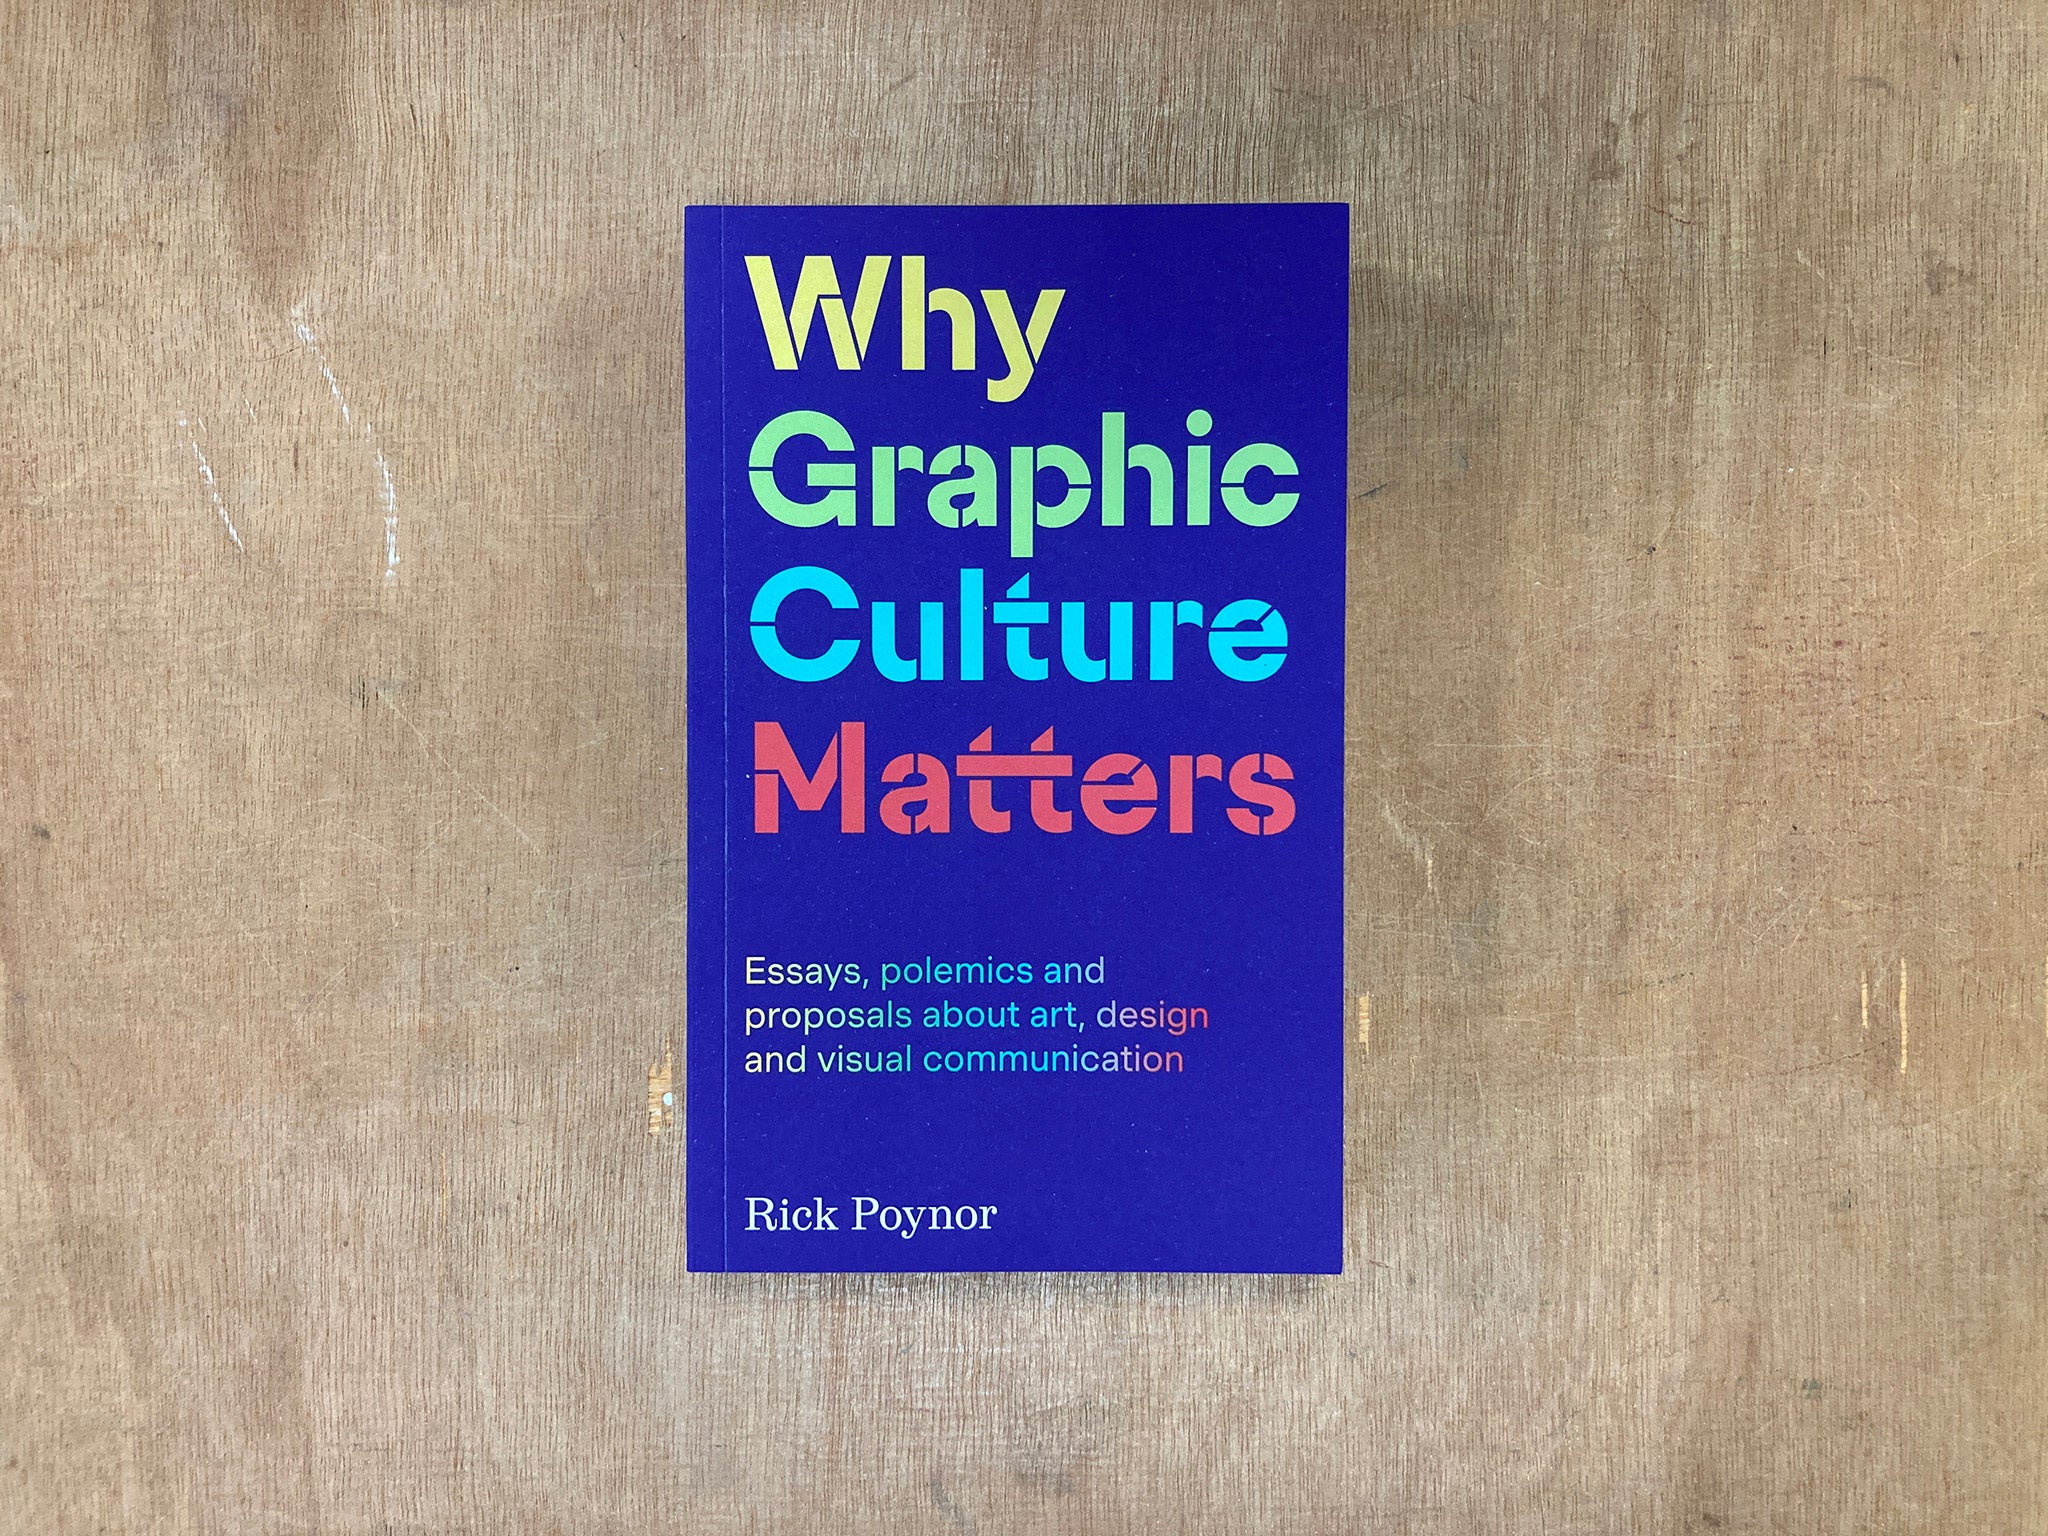 WHY GRAPHIC CULTURE MATTERS by Rick Poynor